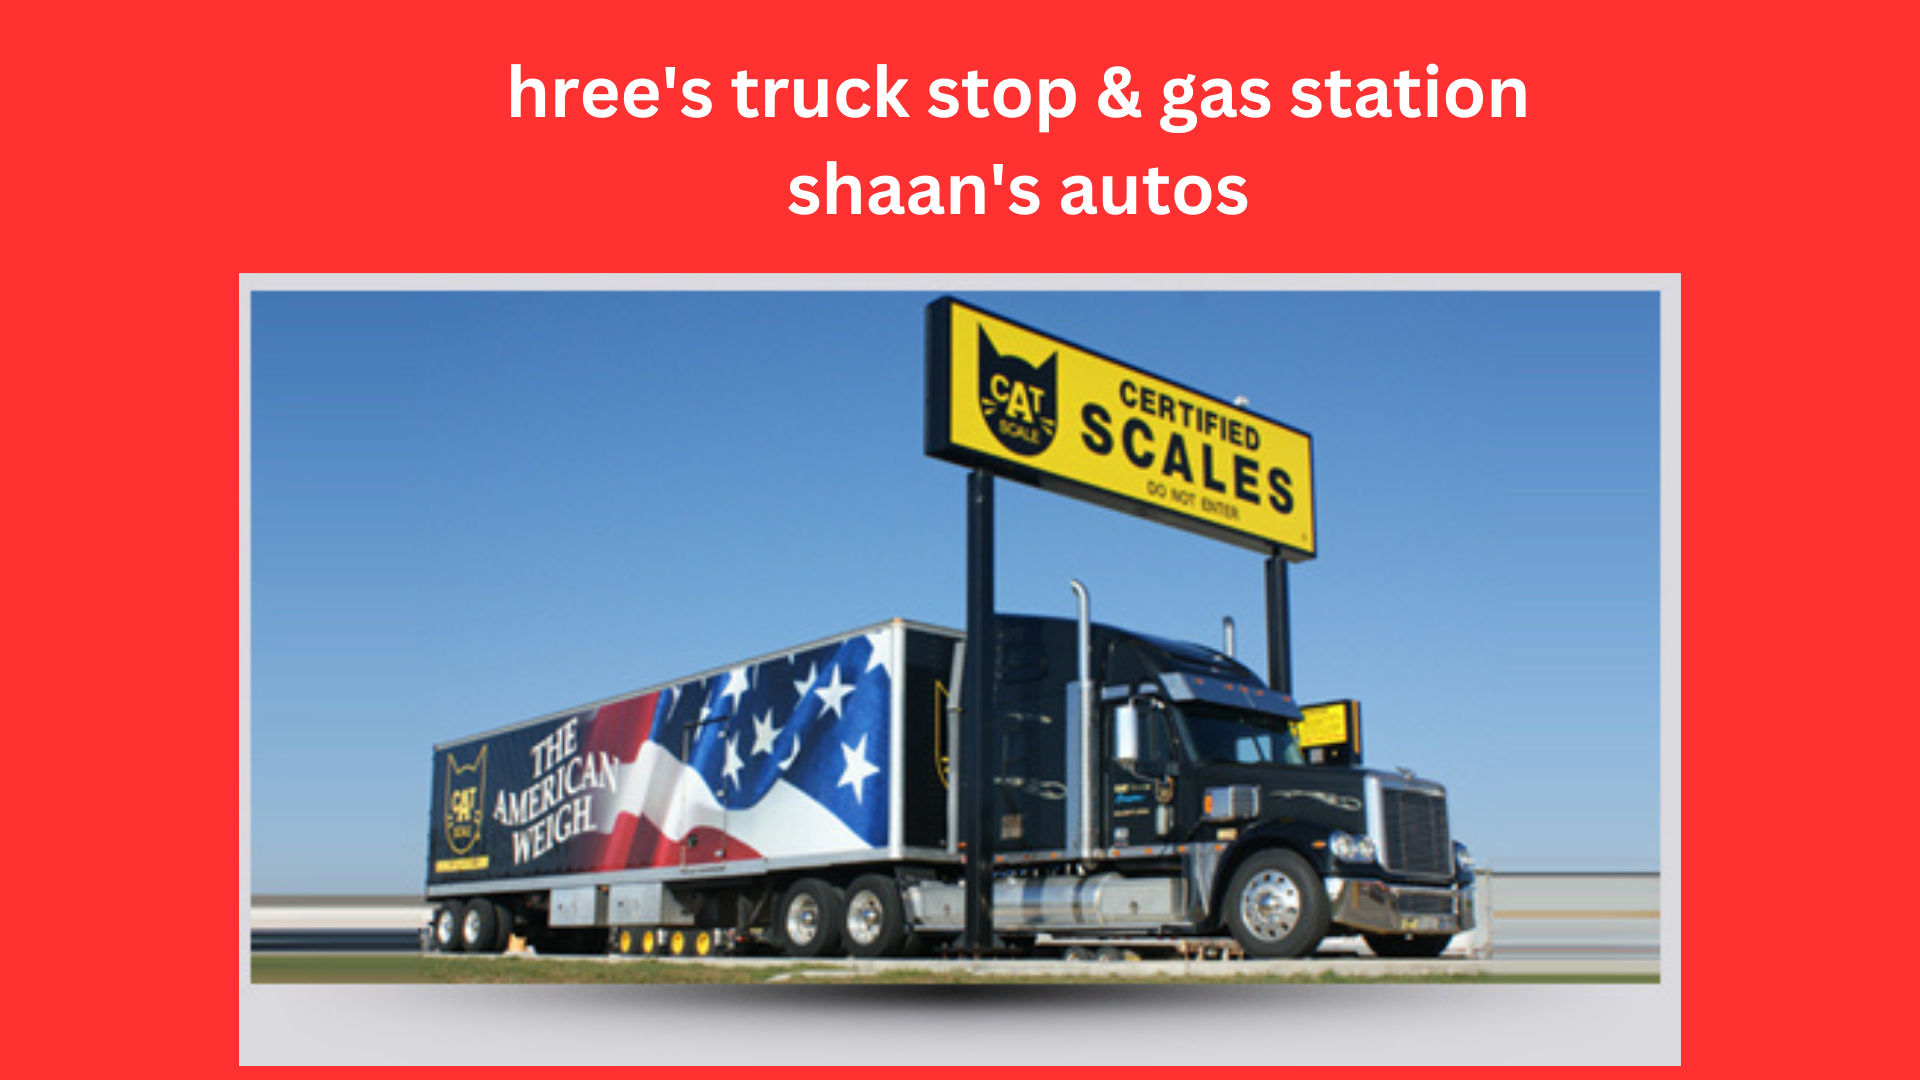 hree's truck stop & gas station shaan's autos